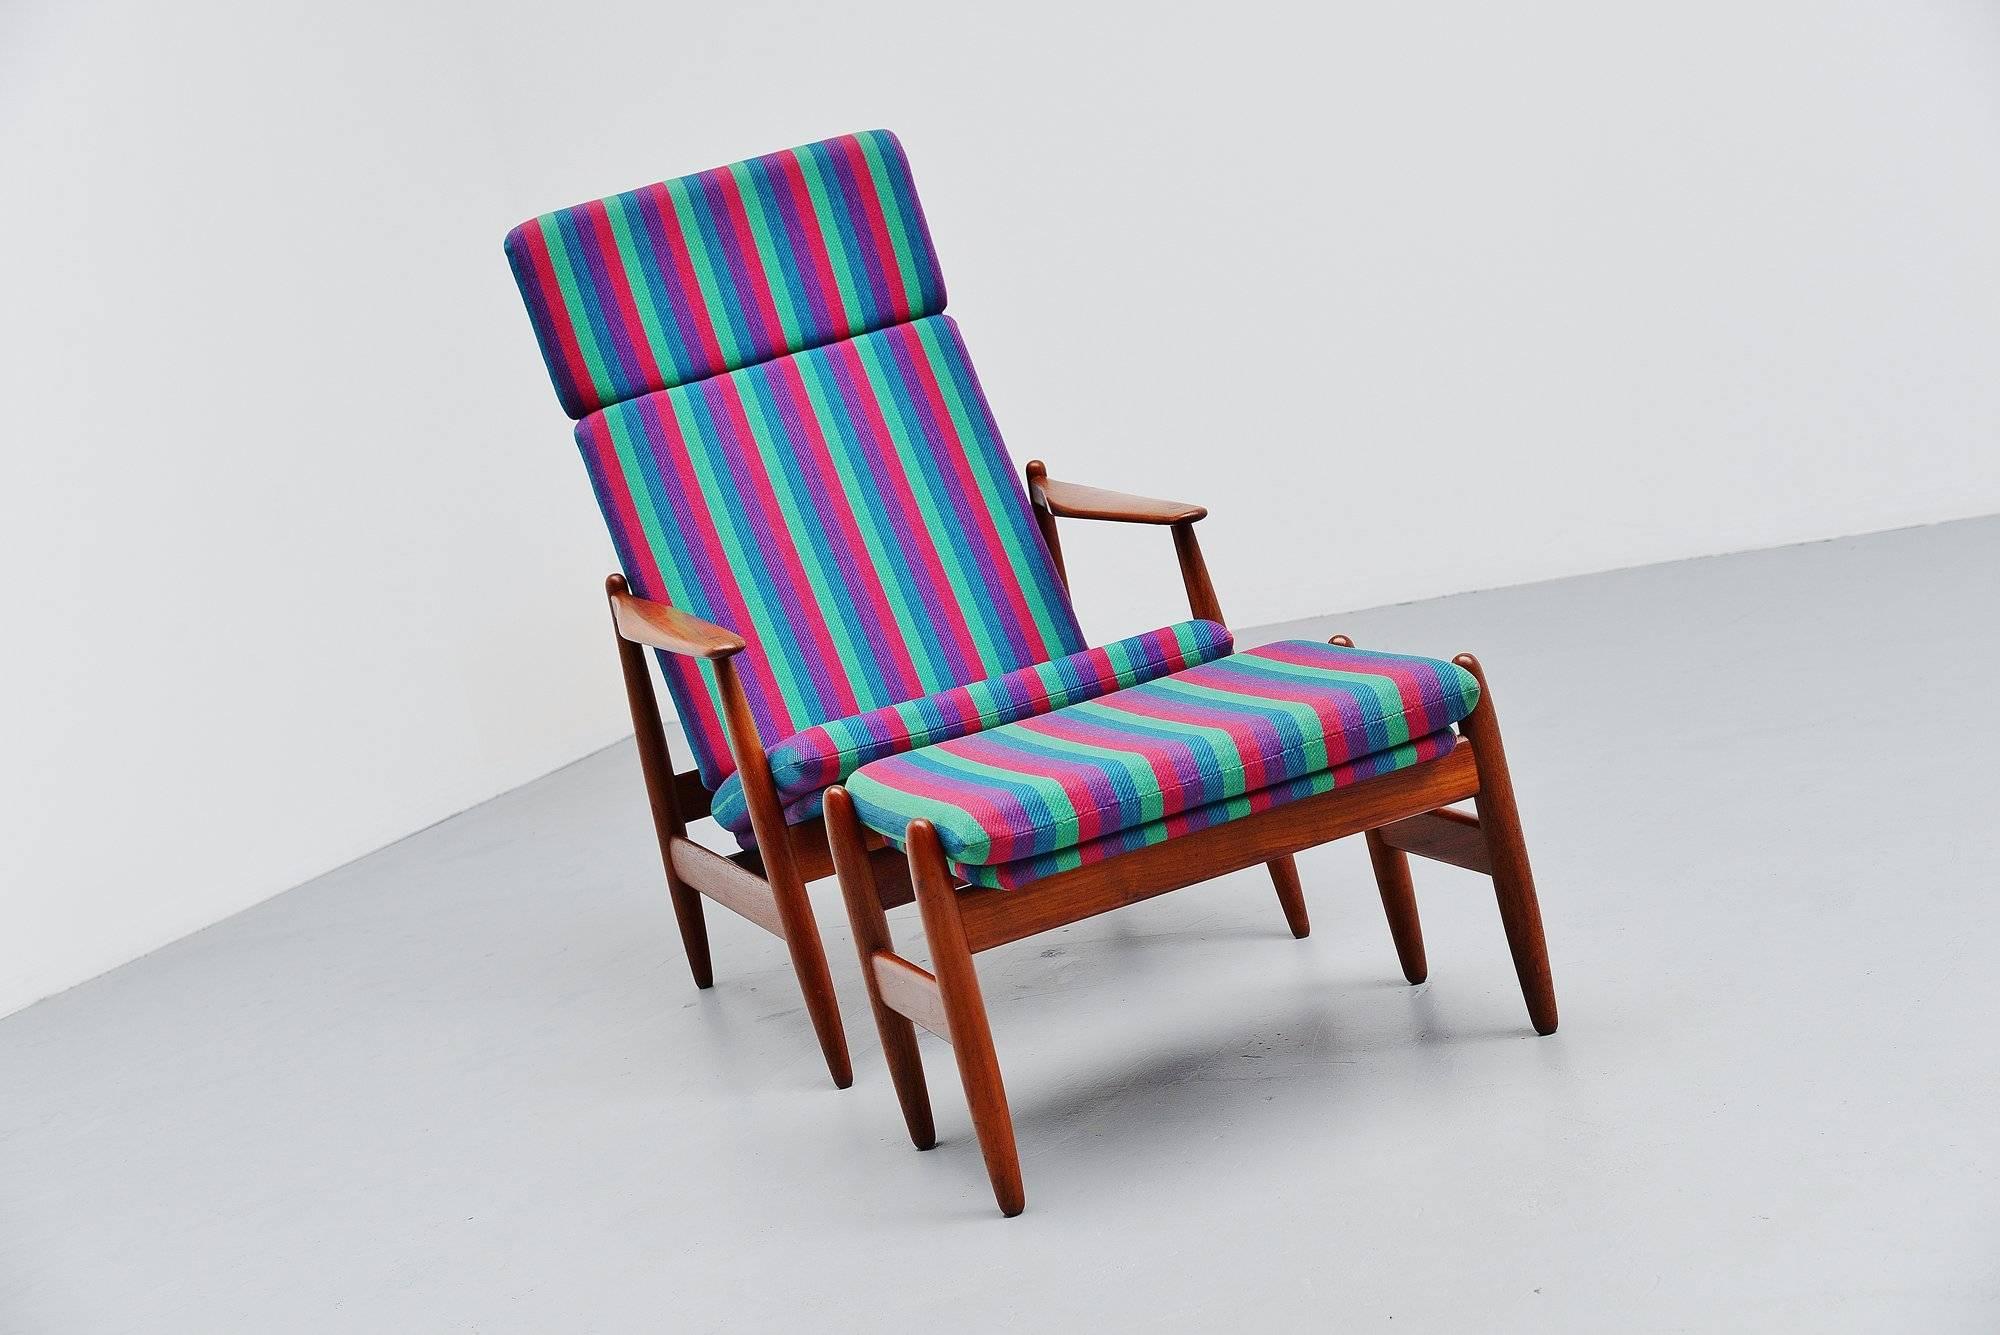 Rare lounge chair designed by Poul M. Volther and manufactured by Frem Røjle, Denmark, 1960. The chair has a solid teak wooden frame and has its original striped upholstery. The chair is in amazing condition there is only a small repair to the top